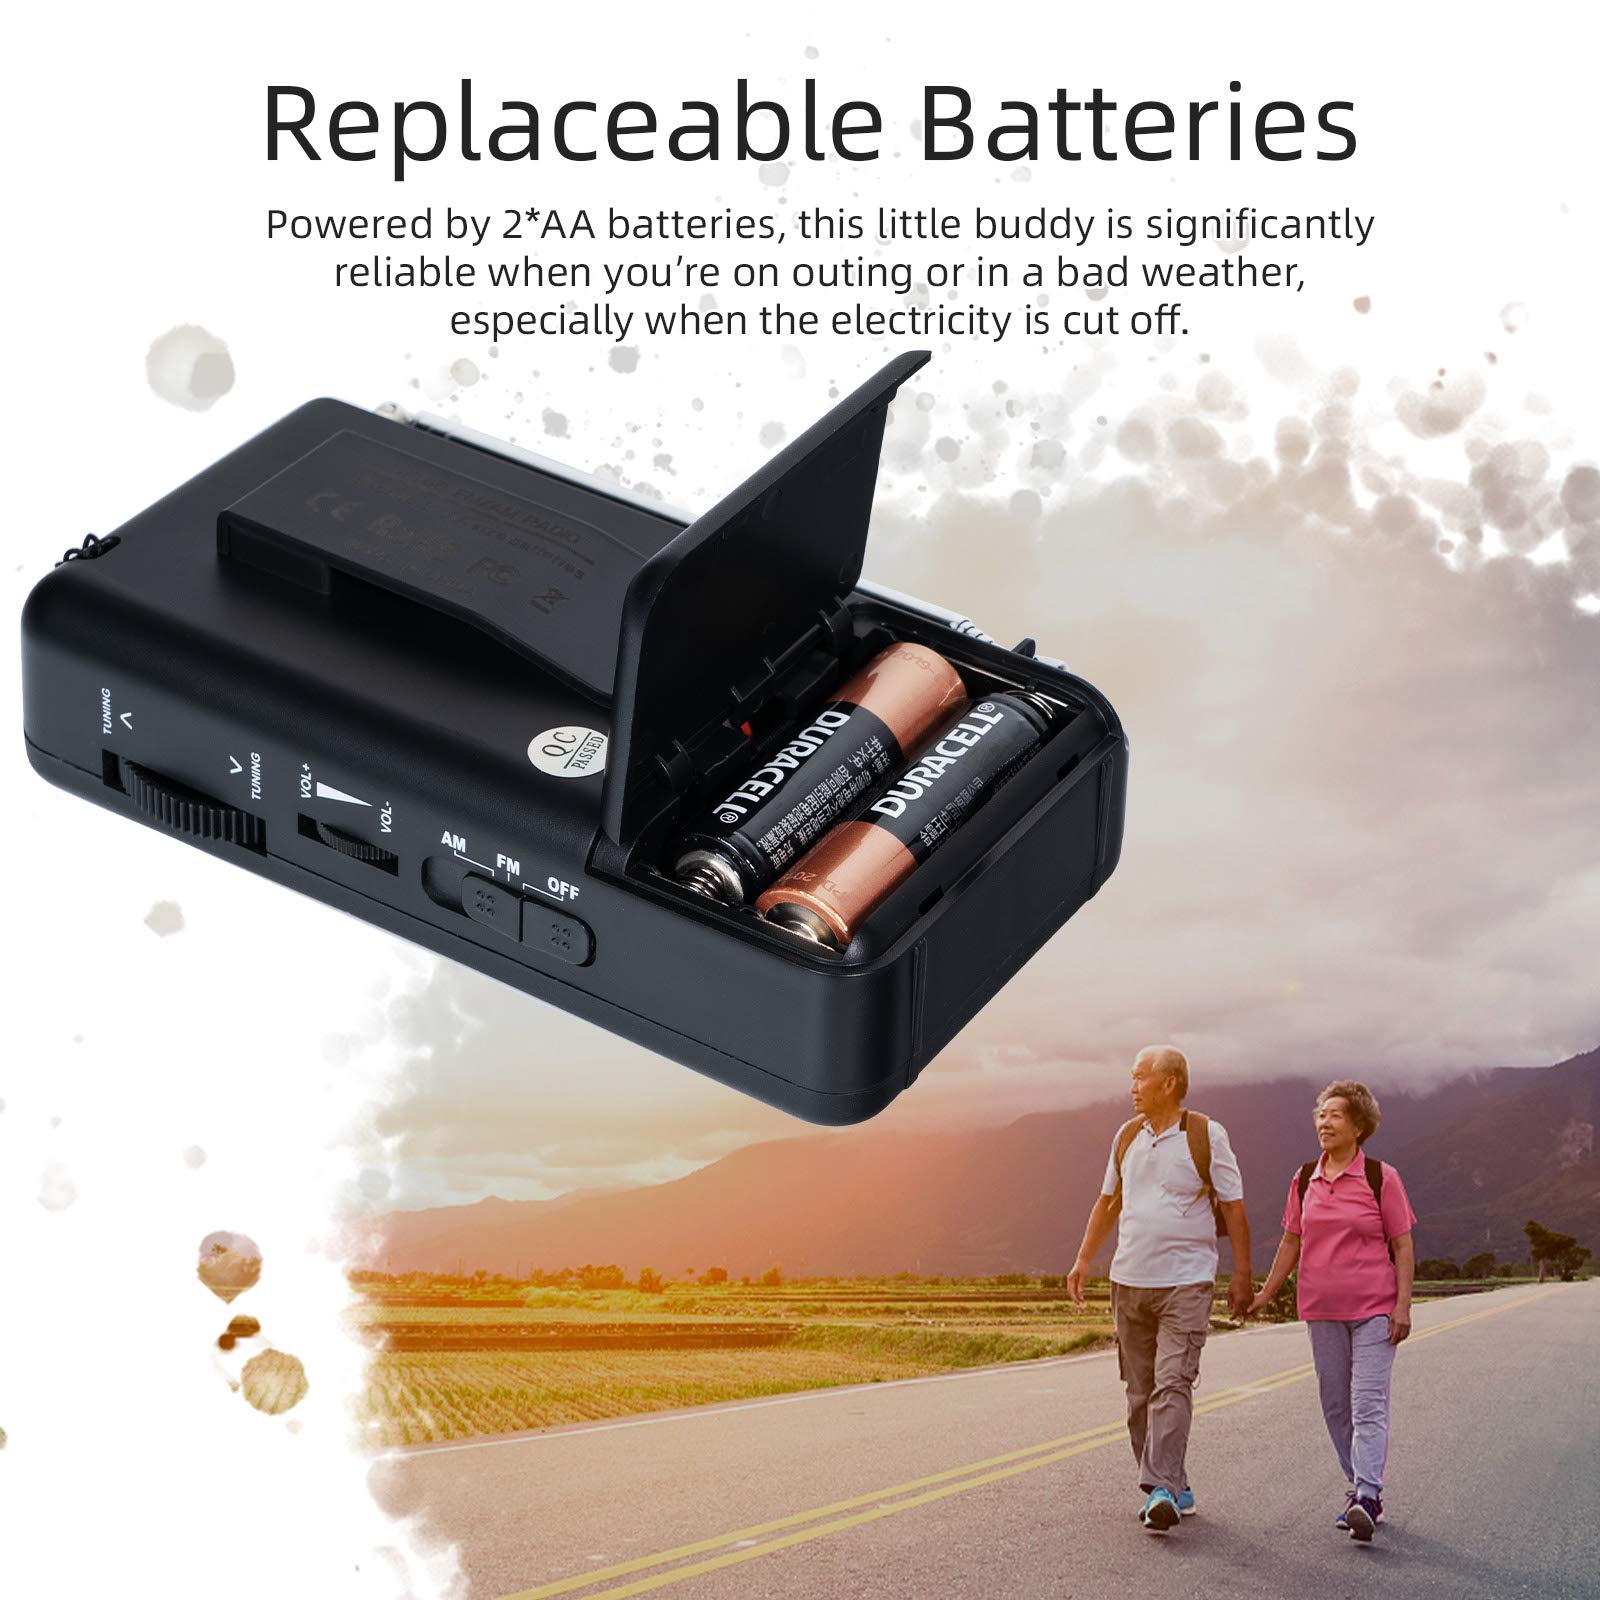 J-166 Portable Radio Battery Operated, AM FM Radio Pocket, Small Radio Transistor with Tuning Light, Back Clip, Excellent Reception for Outdoor & Indoor & Emergencies by PRUNUS